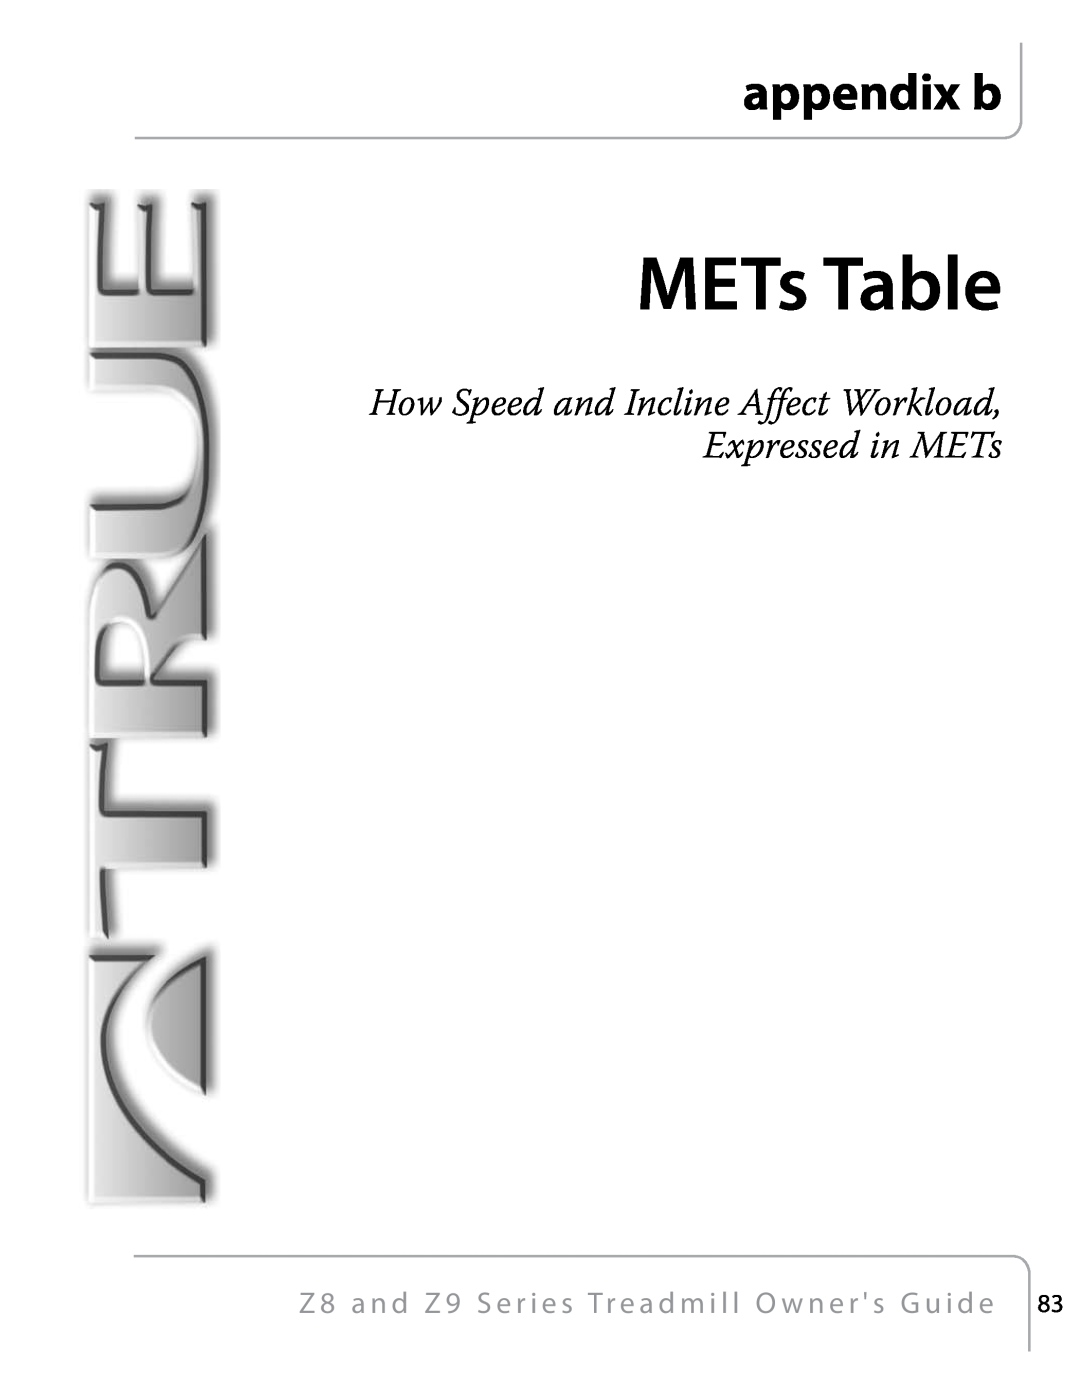 True Fitness Z9, Z8 manual METs Table, appendix b, How Speed and Incline Affect Workload, Expressed in METs 